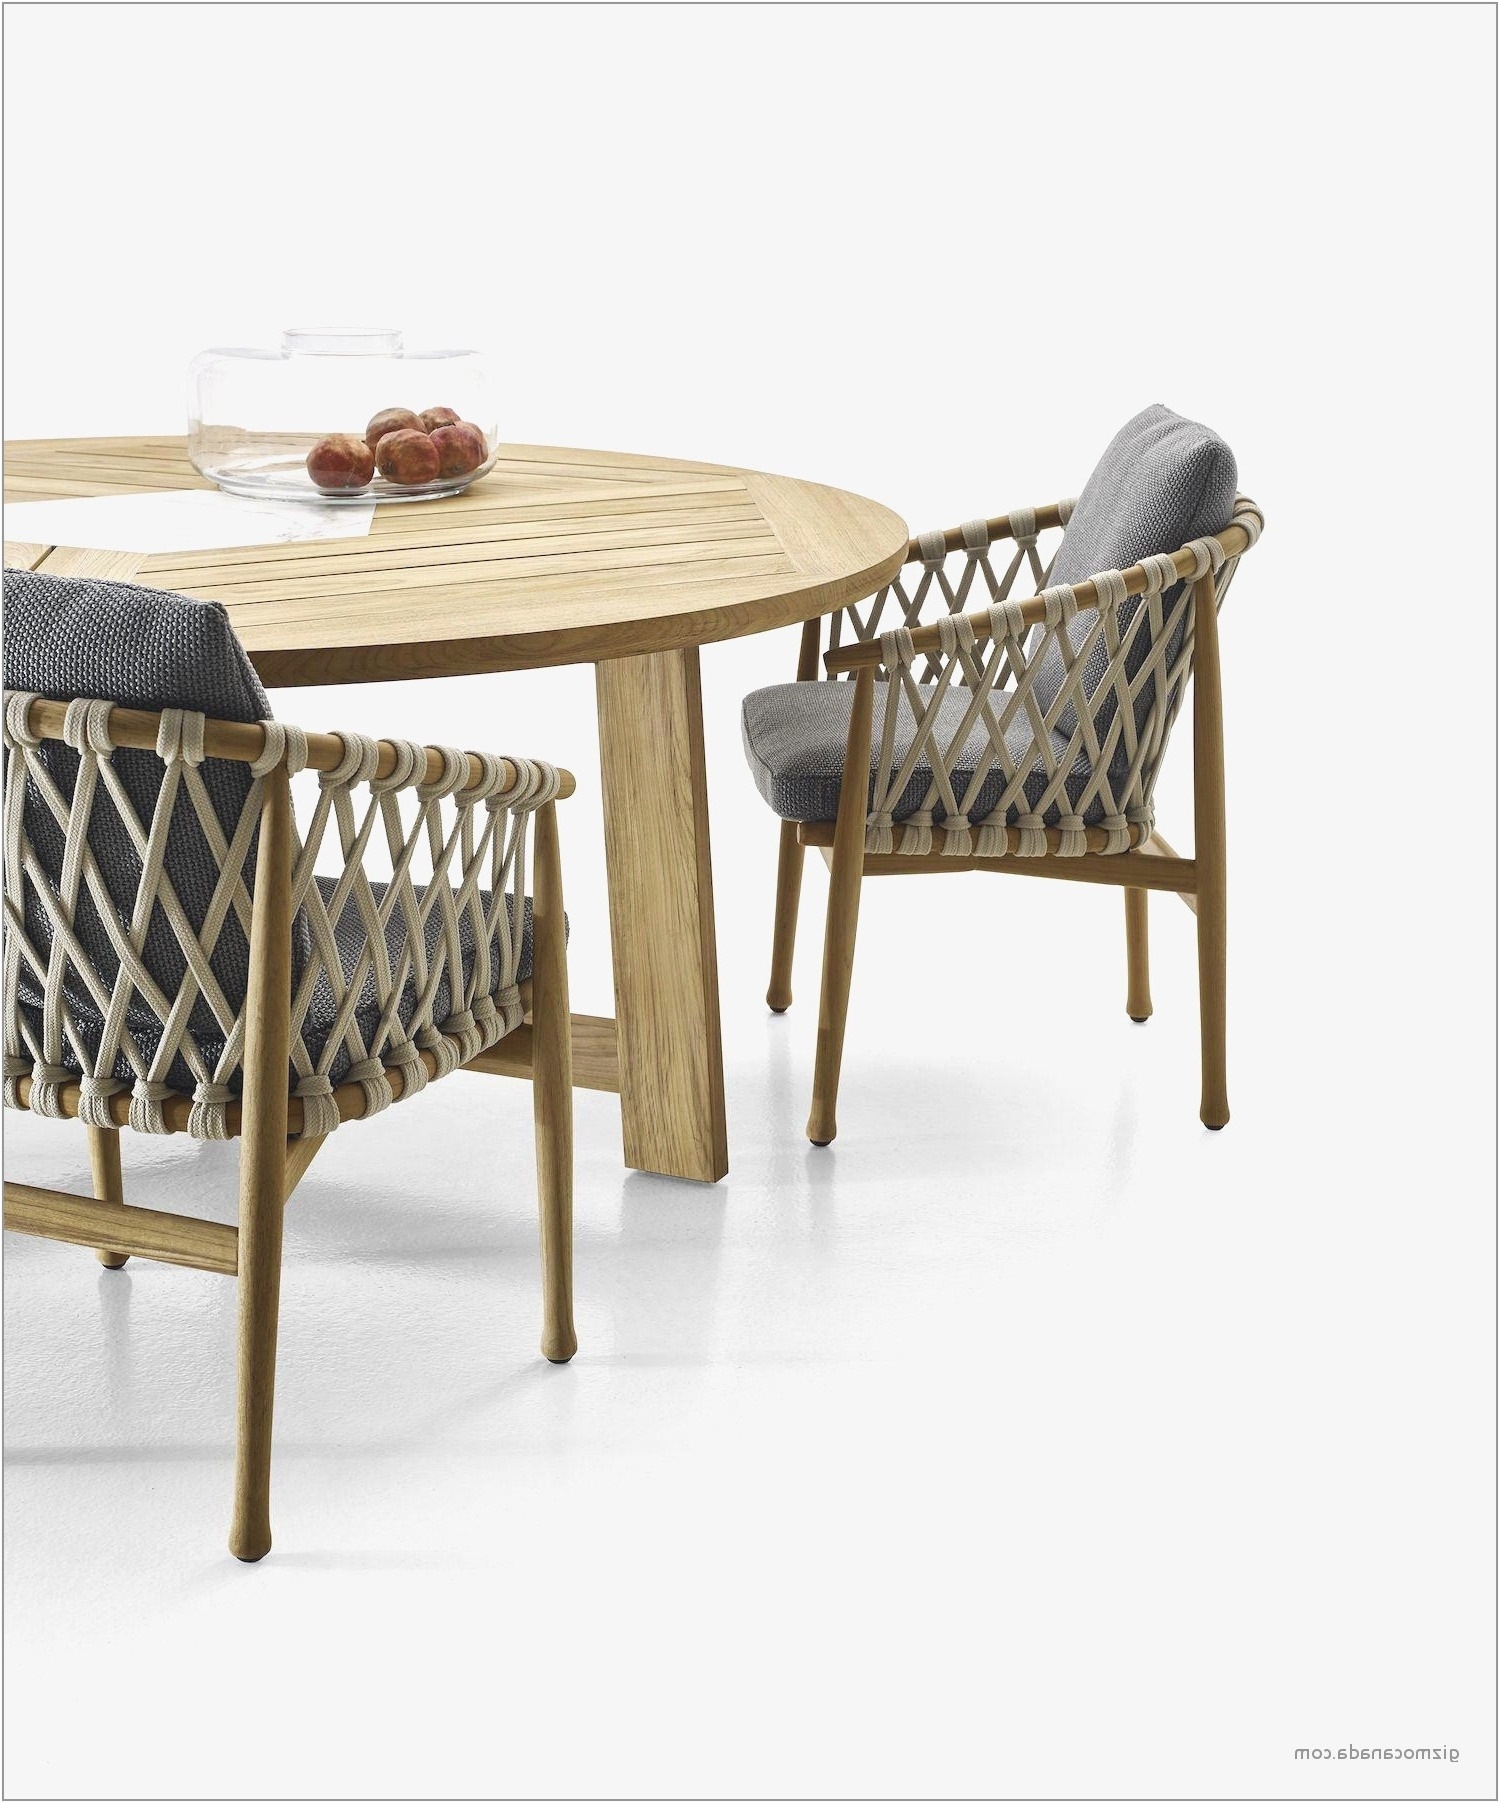 dining table with chairs sale fresh furniture small couches luxury wicker outdoor sofa 0d patio chairs